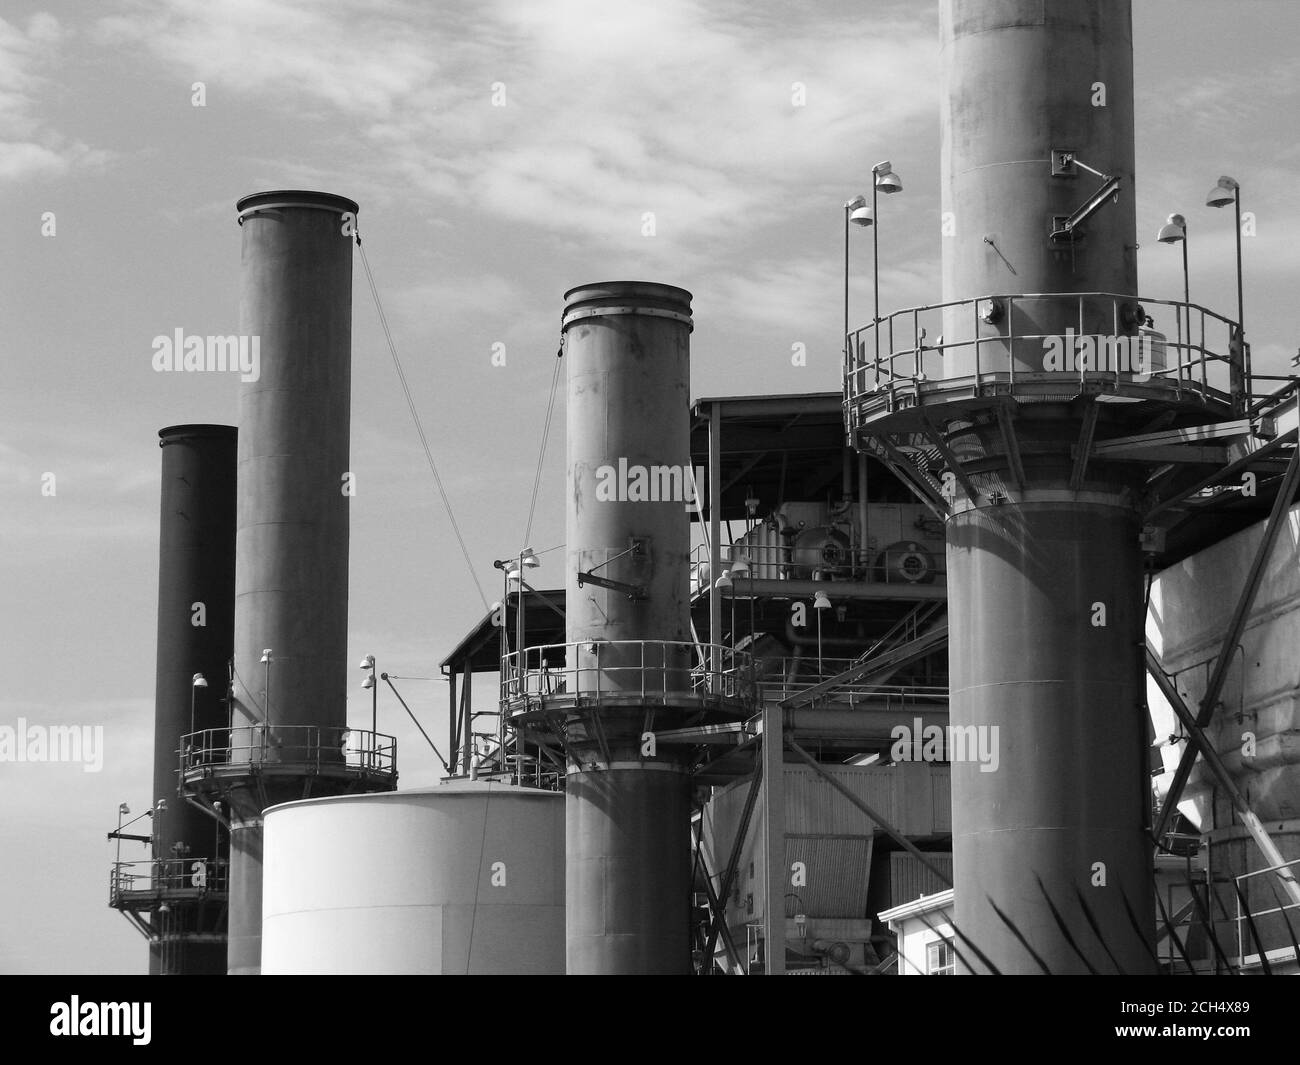 Grand Terrace, California, USA - July 2007:  Archival black and white view of smoke stacks at the now demolished Grand Terrace power plant in Southern California. Stock Photo